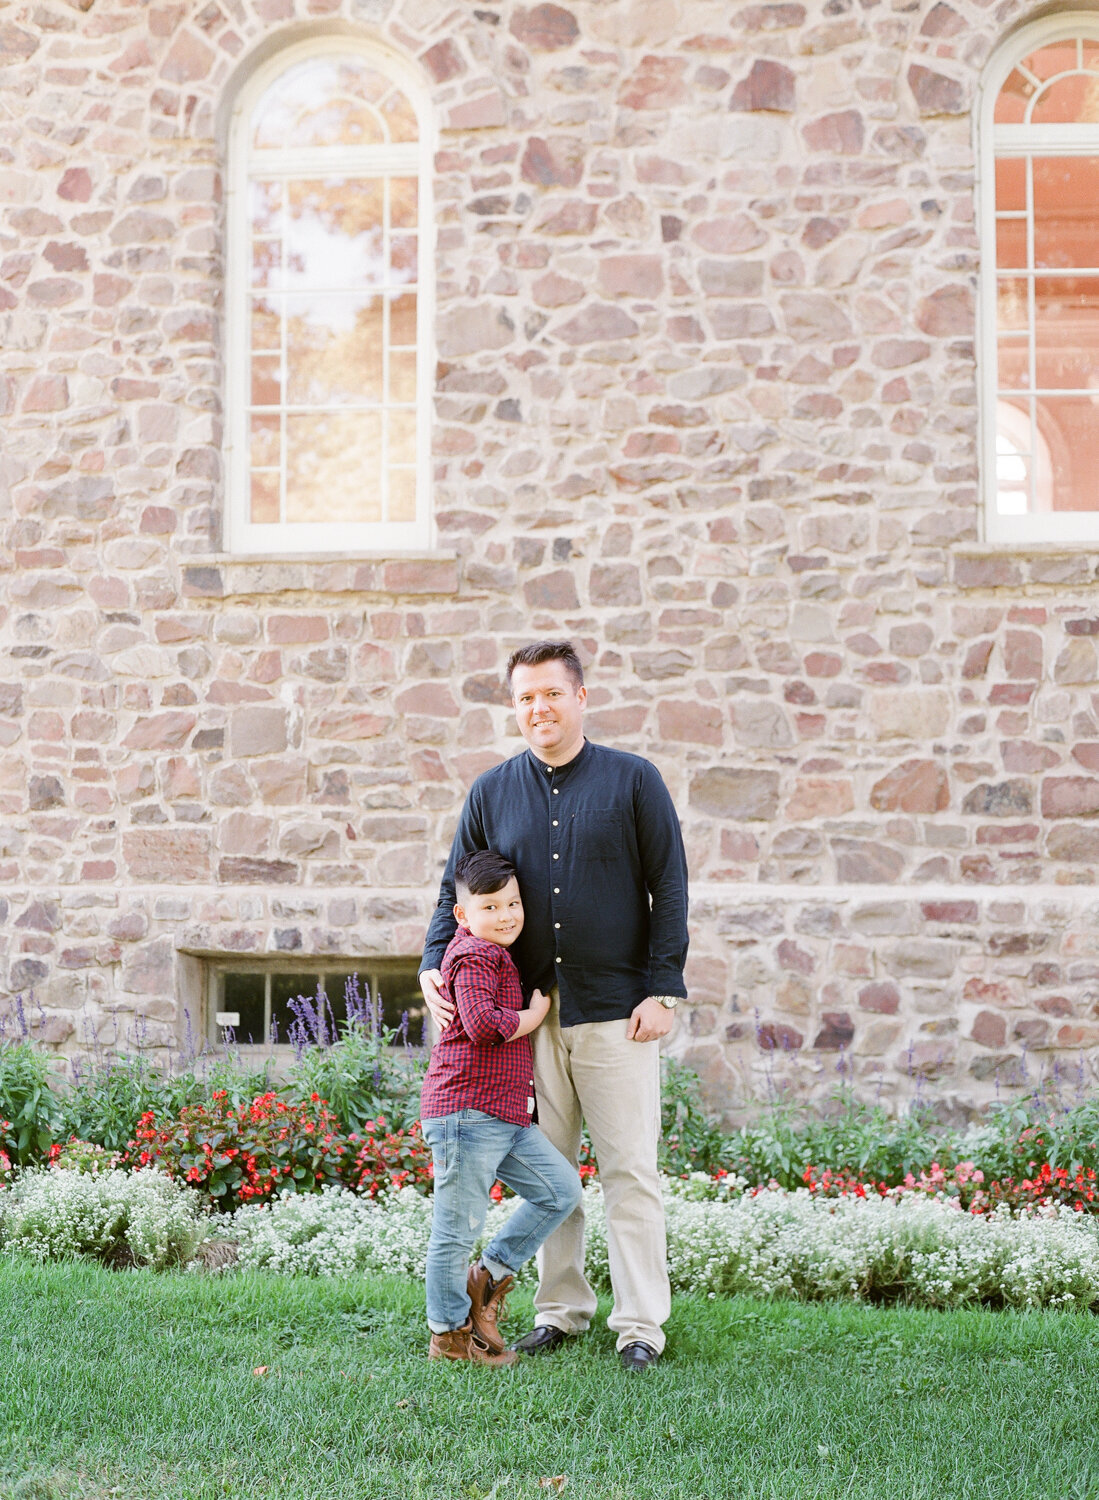 Jacqueline Anne Photography - Family Photographer in Halifax-24